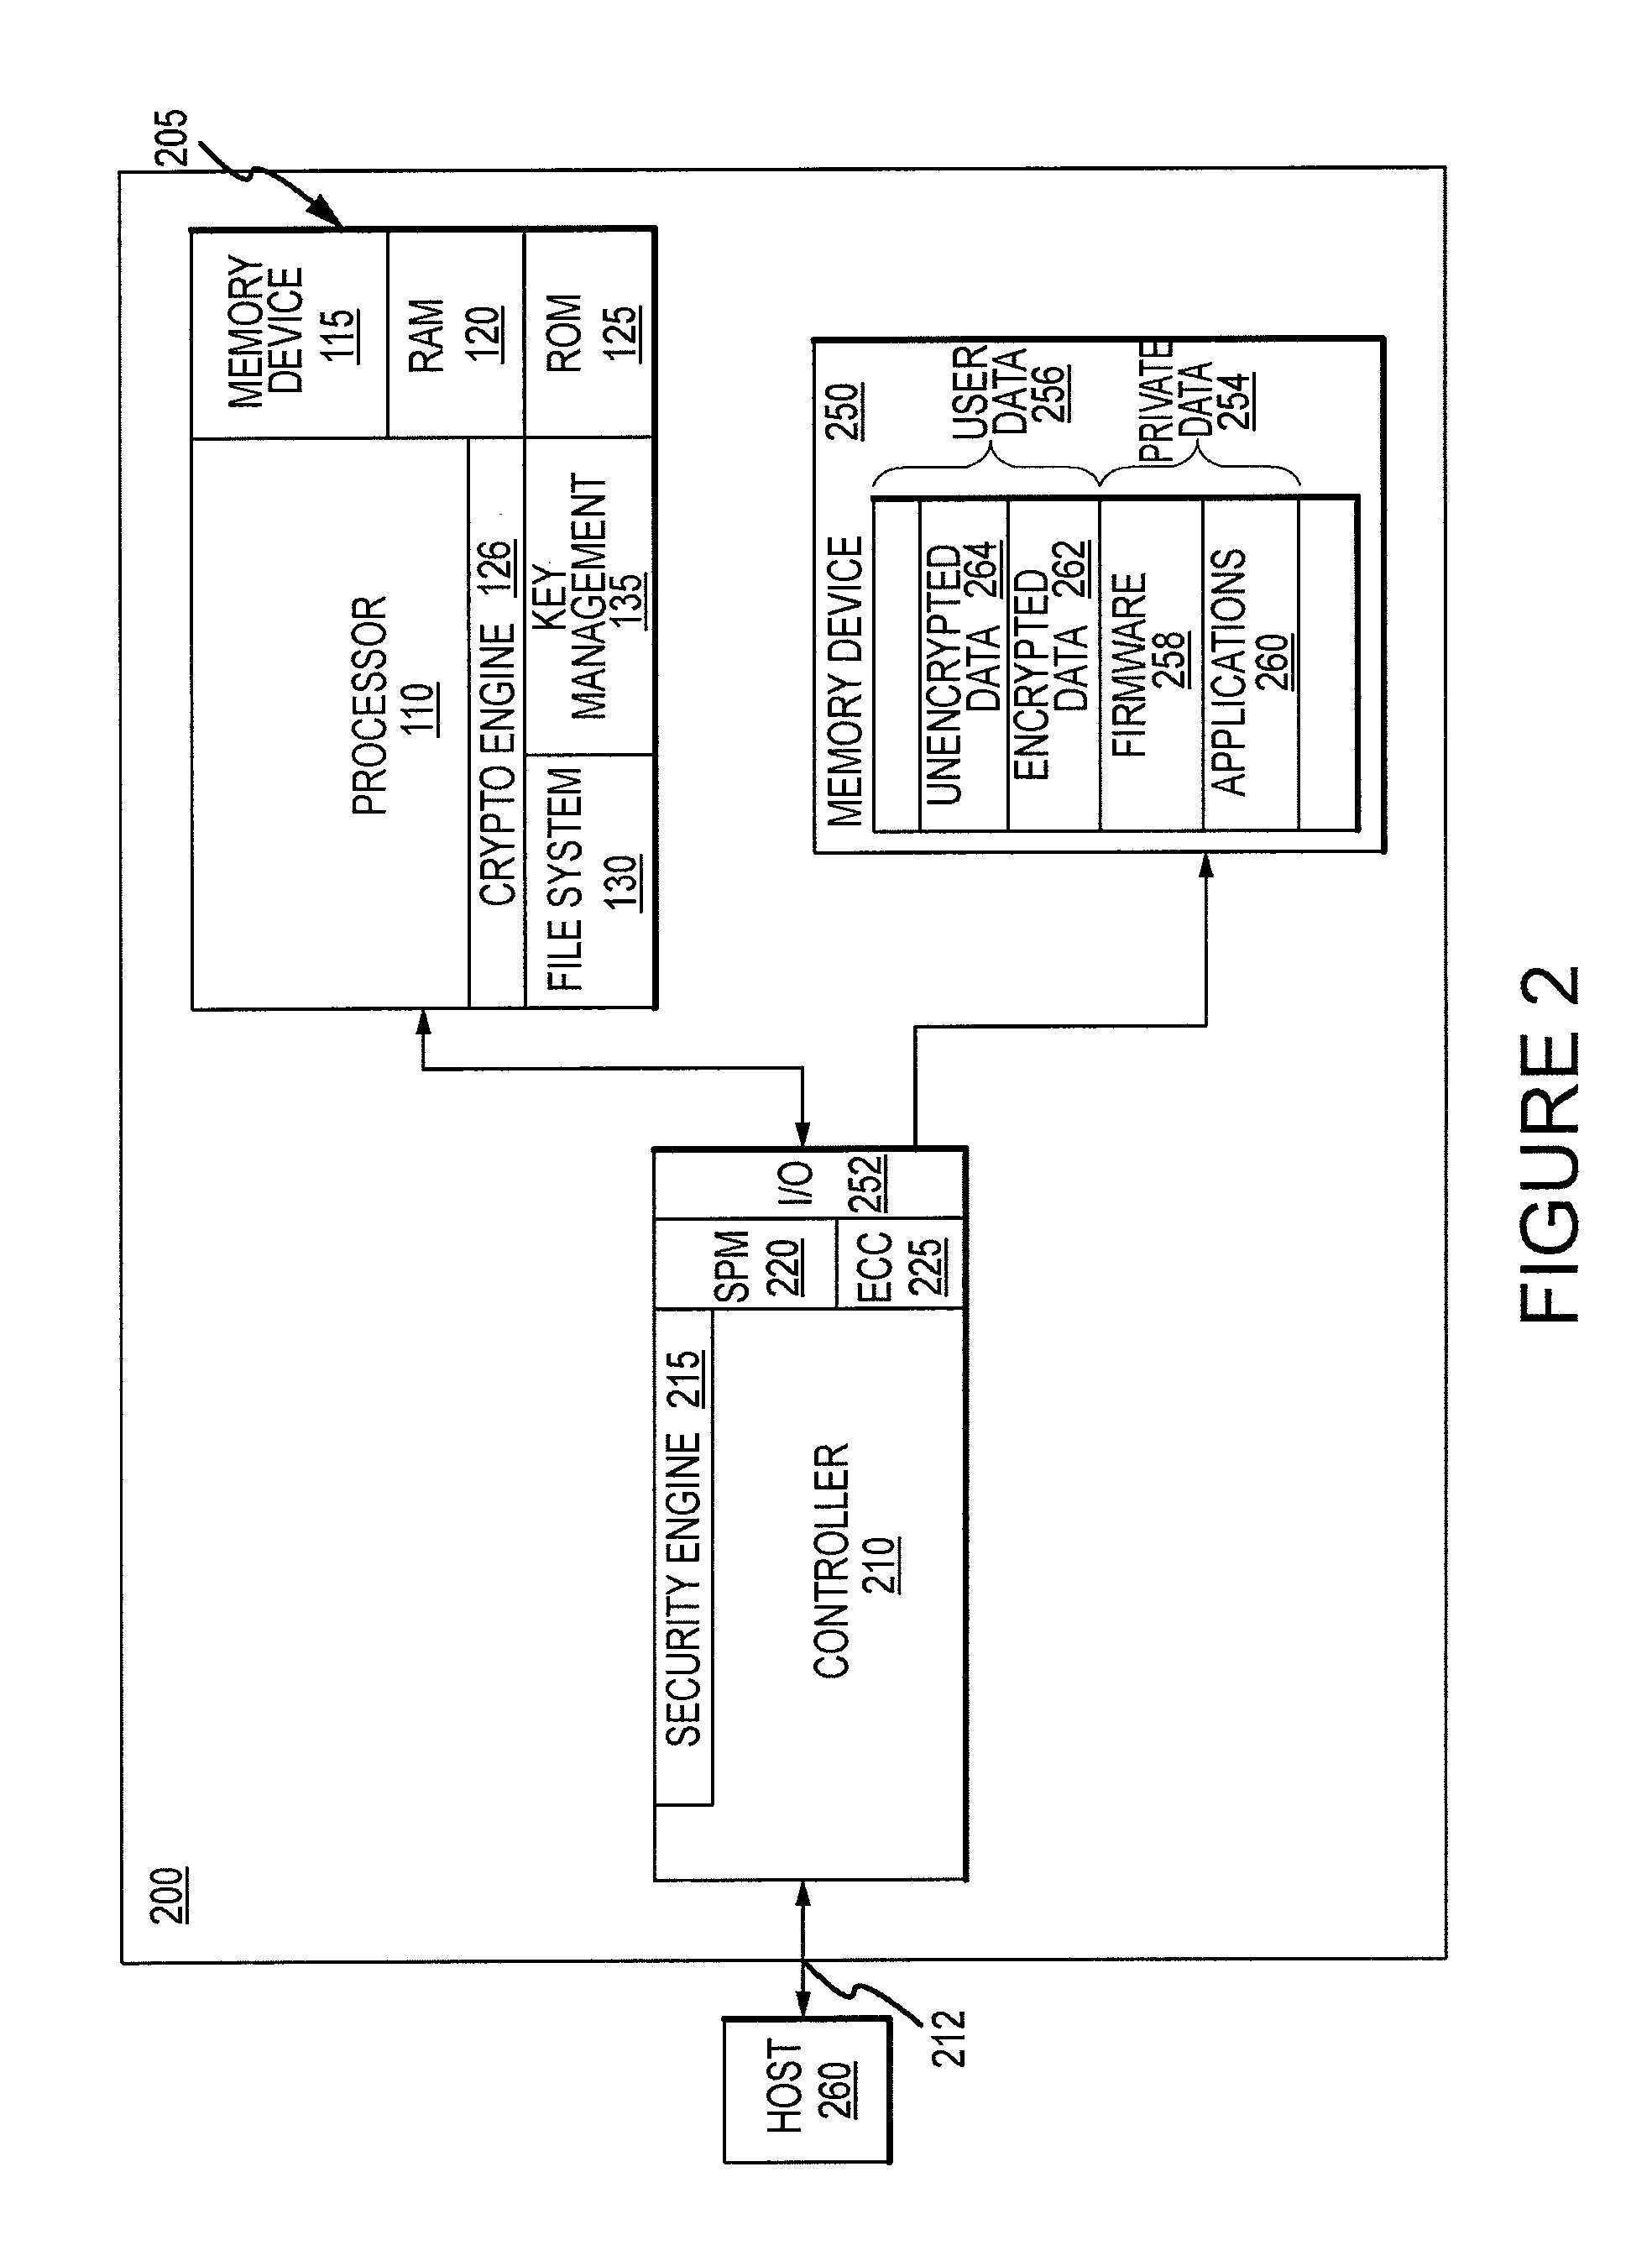 Critical Security Parameter Generation and Exchange System and Method for Smart-Card Memory Modules